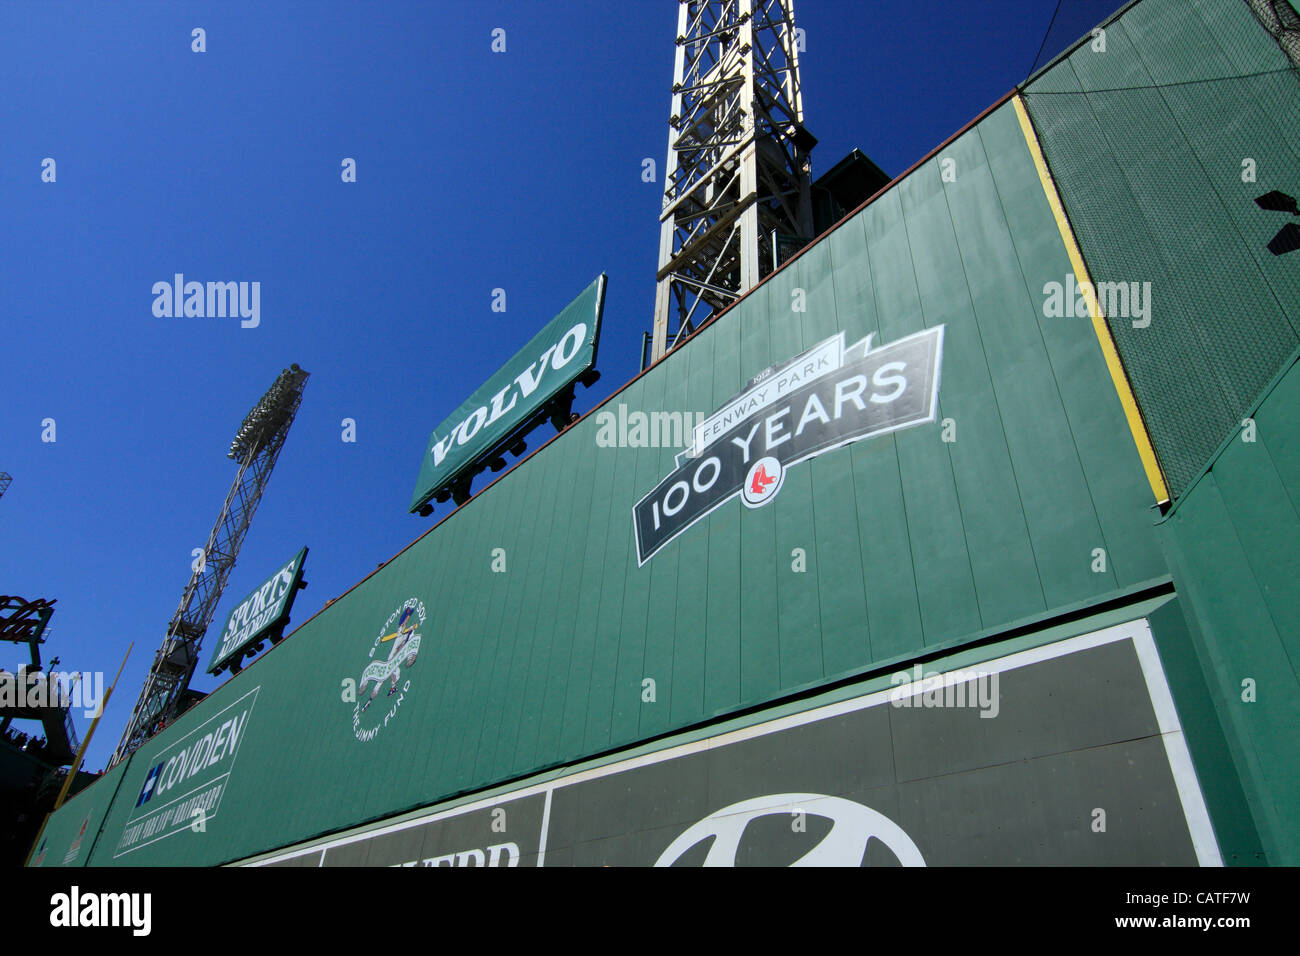 Boston, Massachusetts, USA. April 19, 2012. The Green Monster as seen from the warning track in left field of Fenway Park. Stock Photo